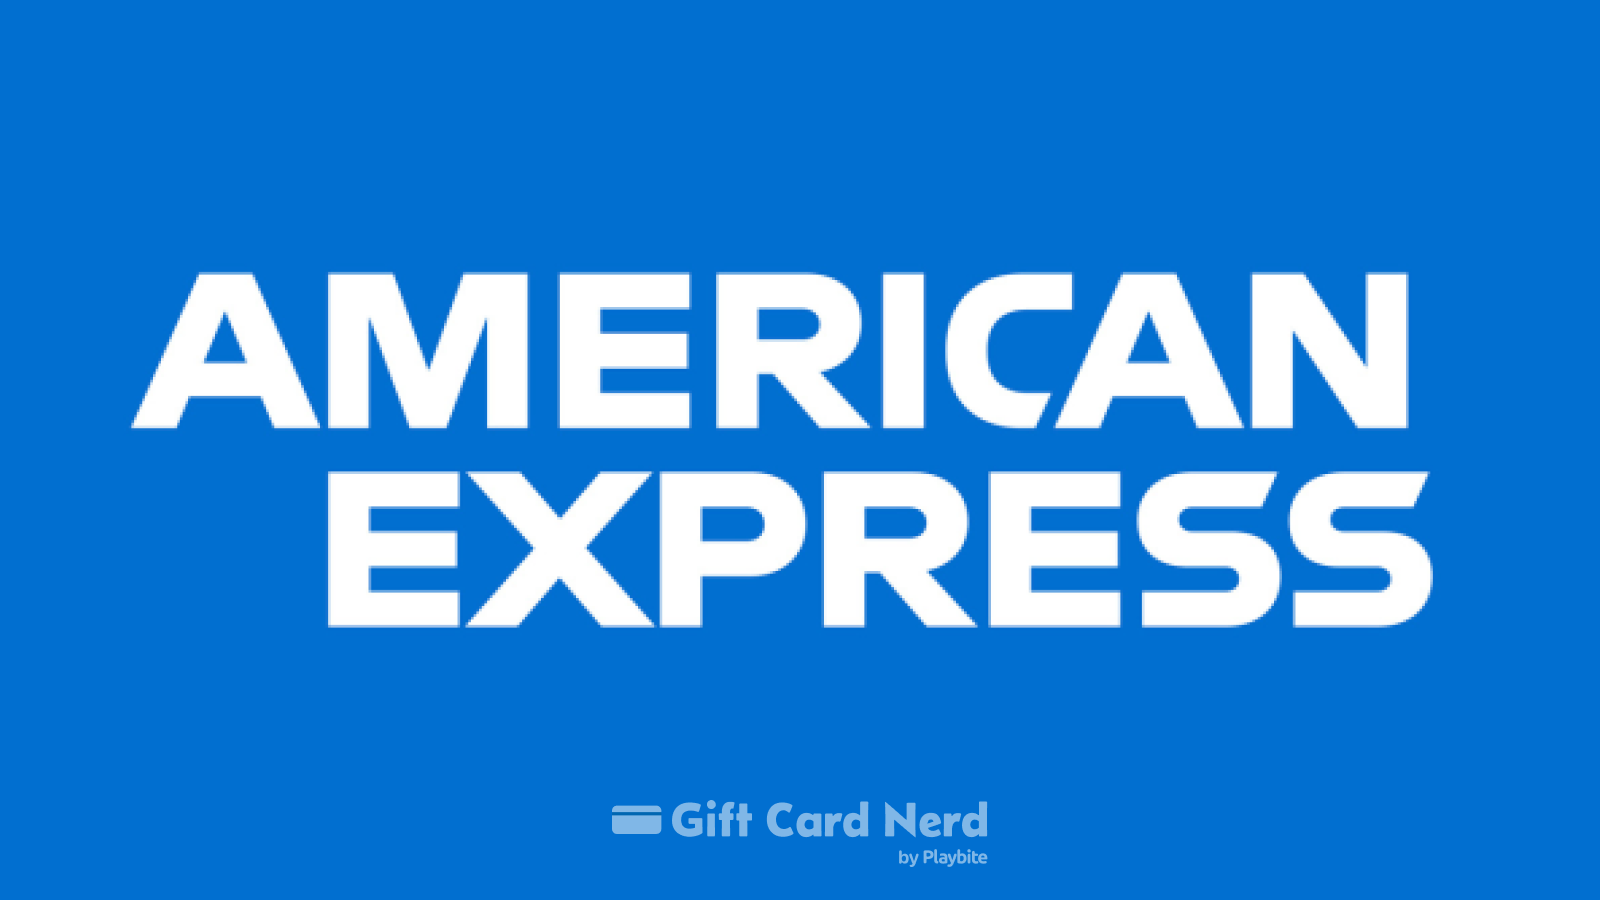 Can I Use an Amex Gift Card on Apple Wallet?